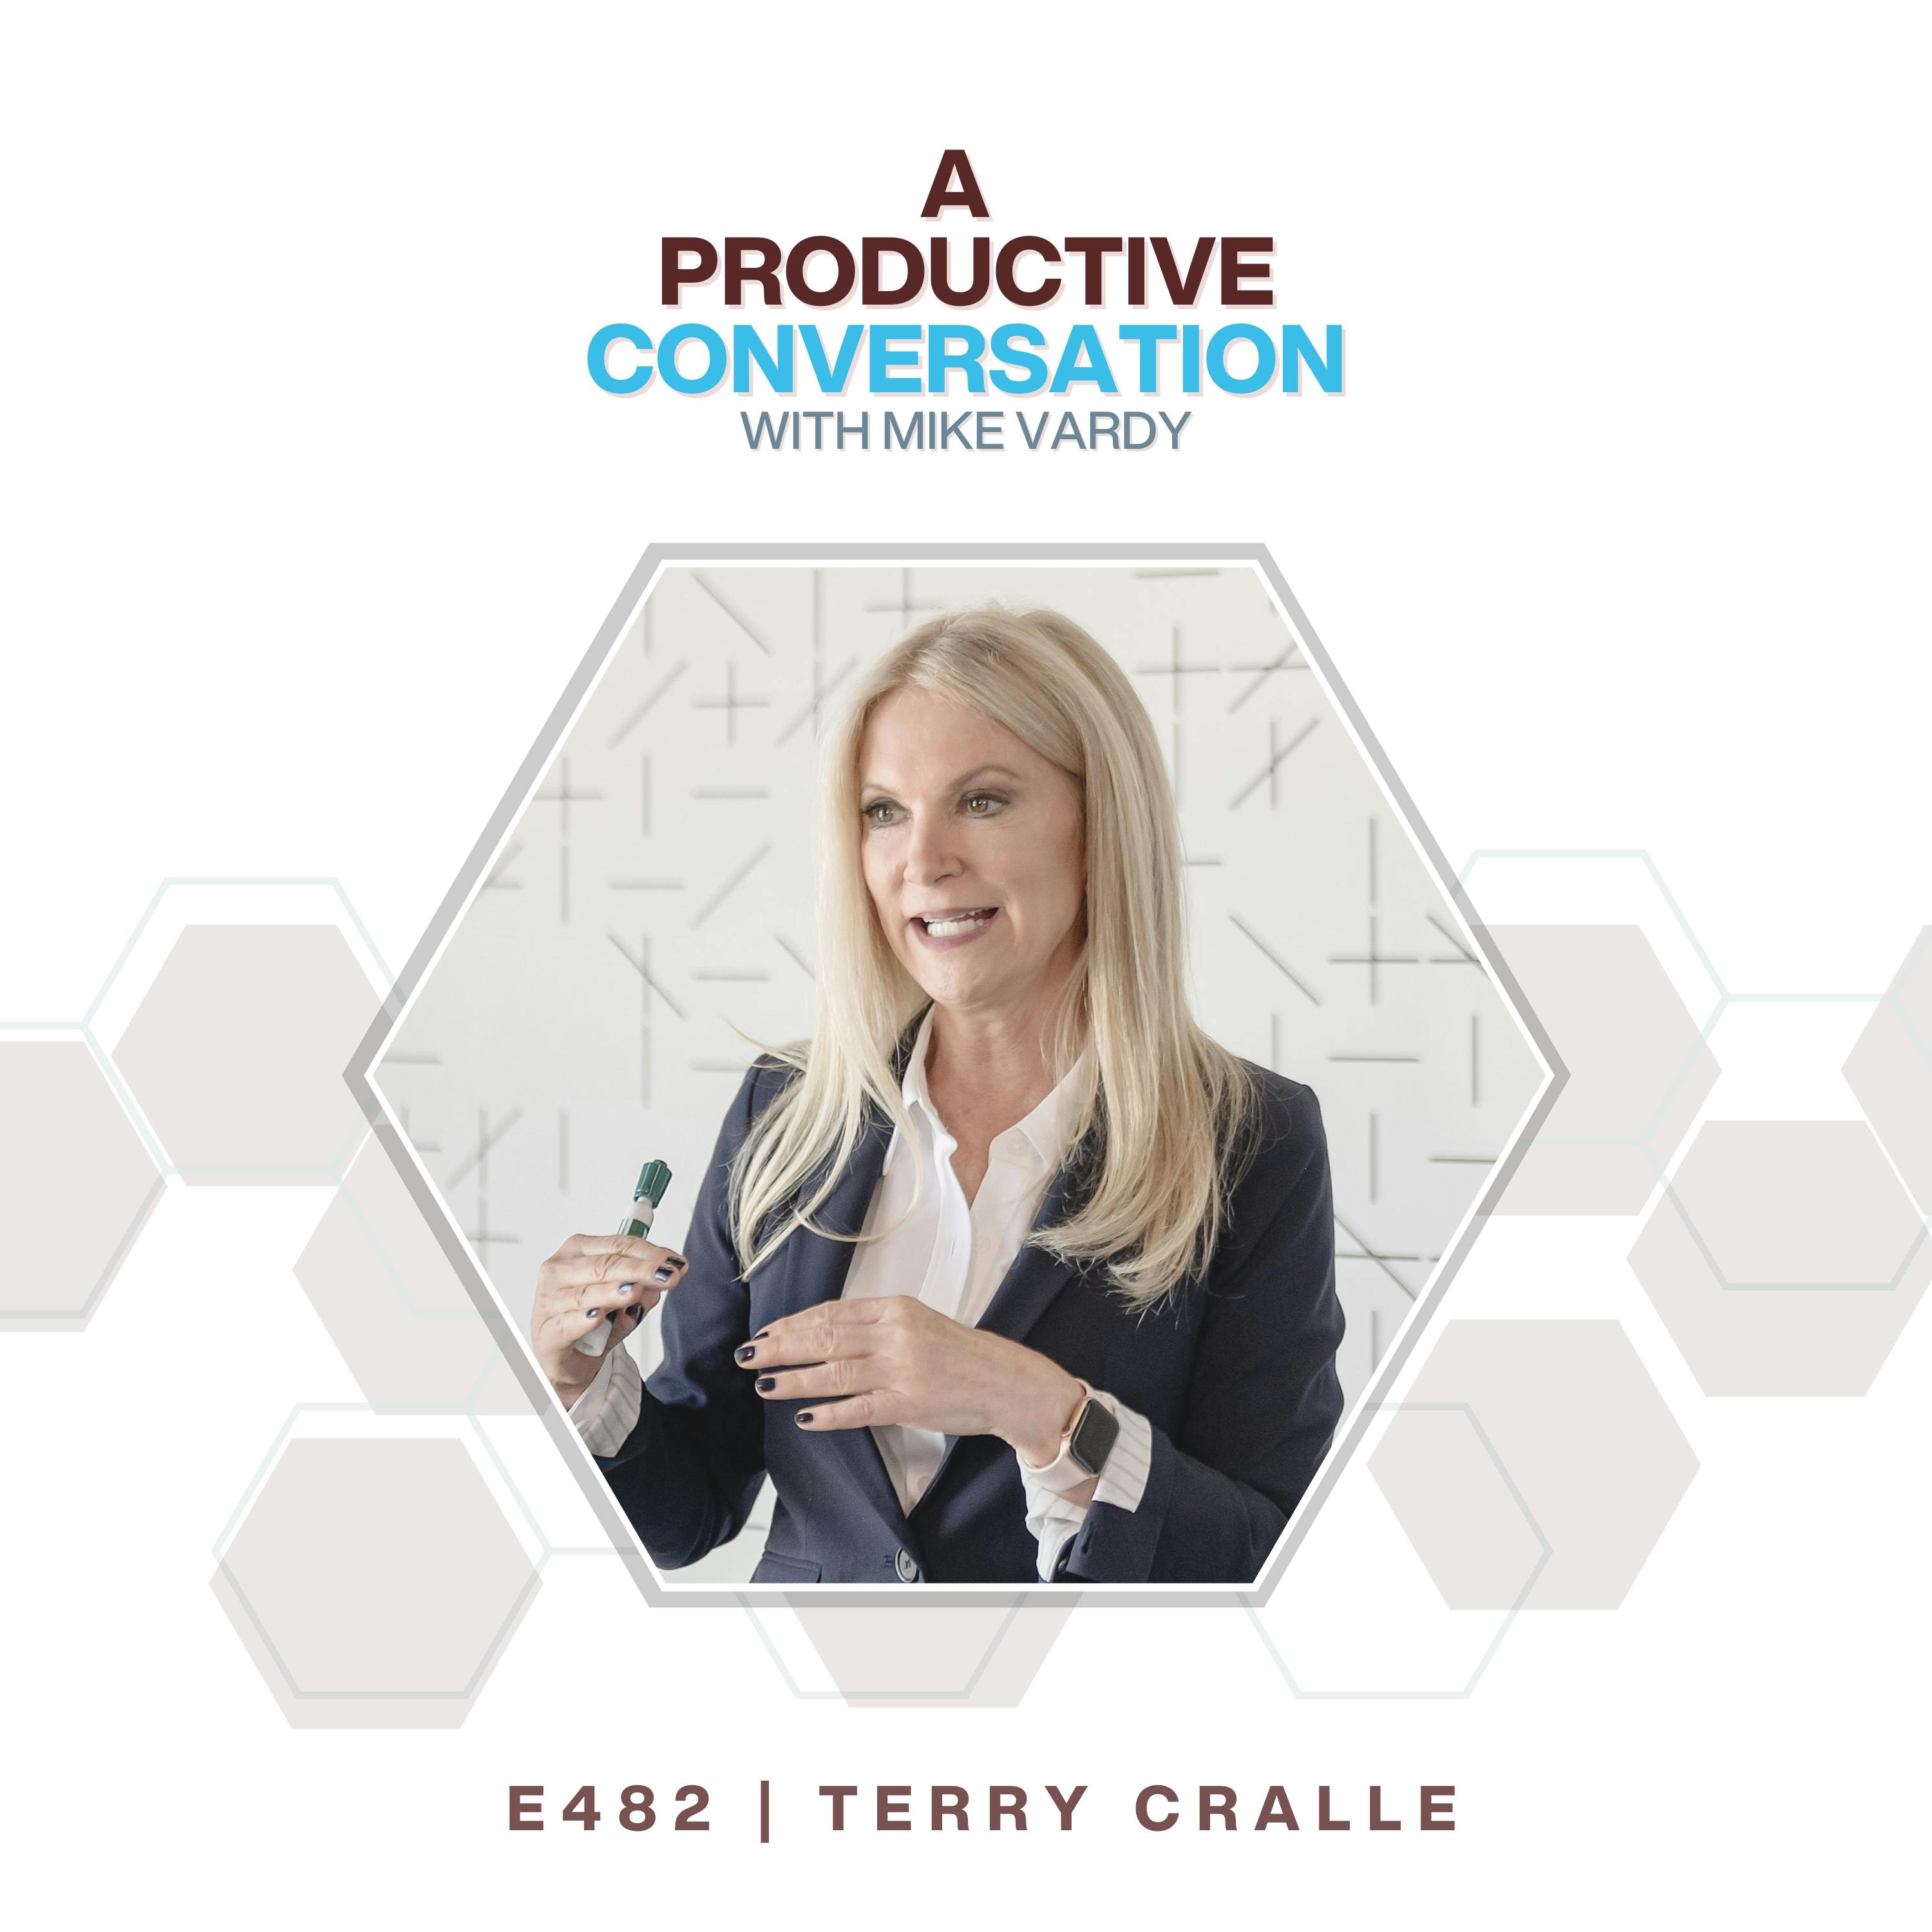 Terry Cralle Talks About The Relationship Between Sleep And Productivity